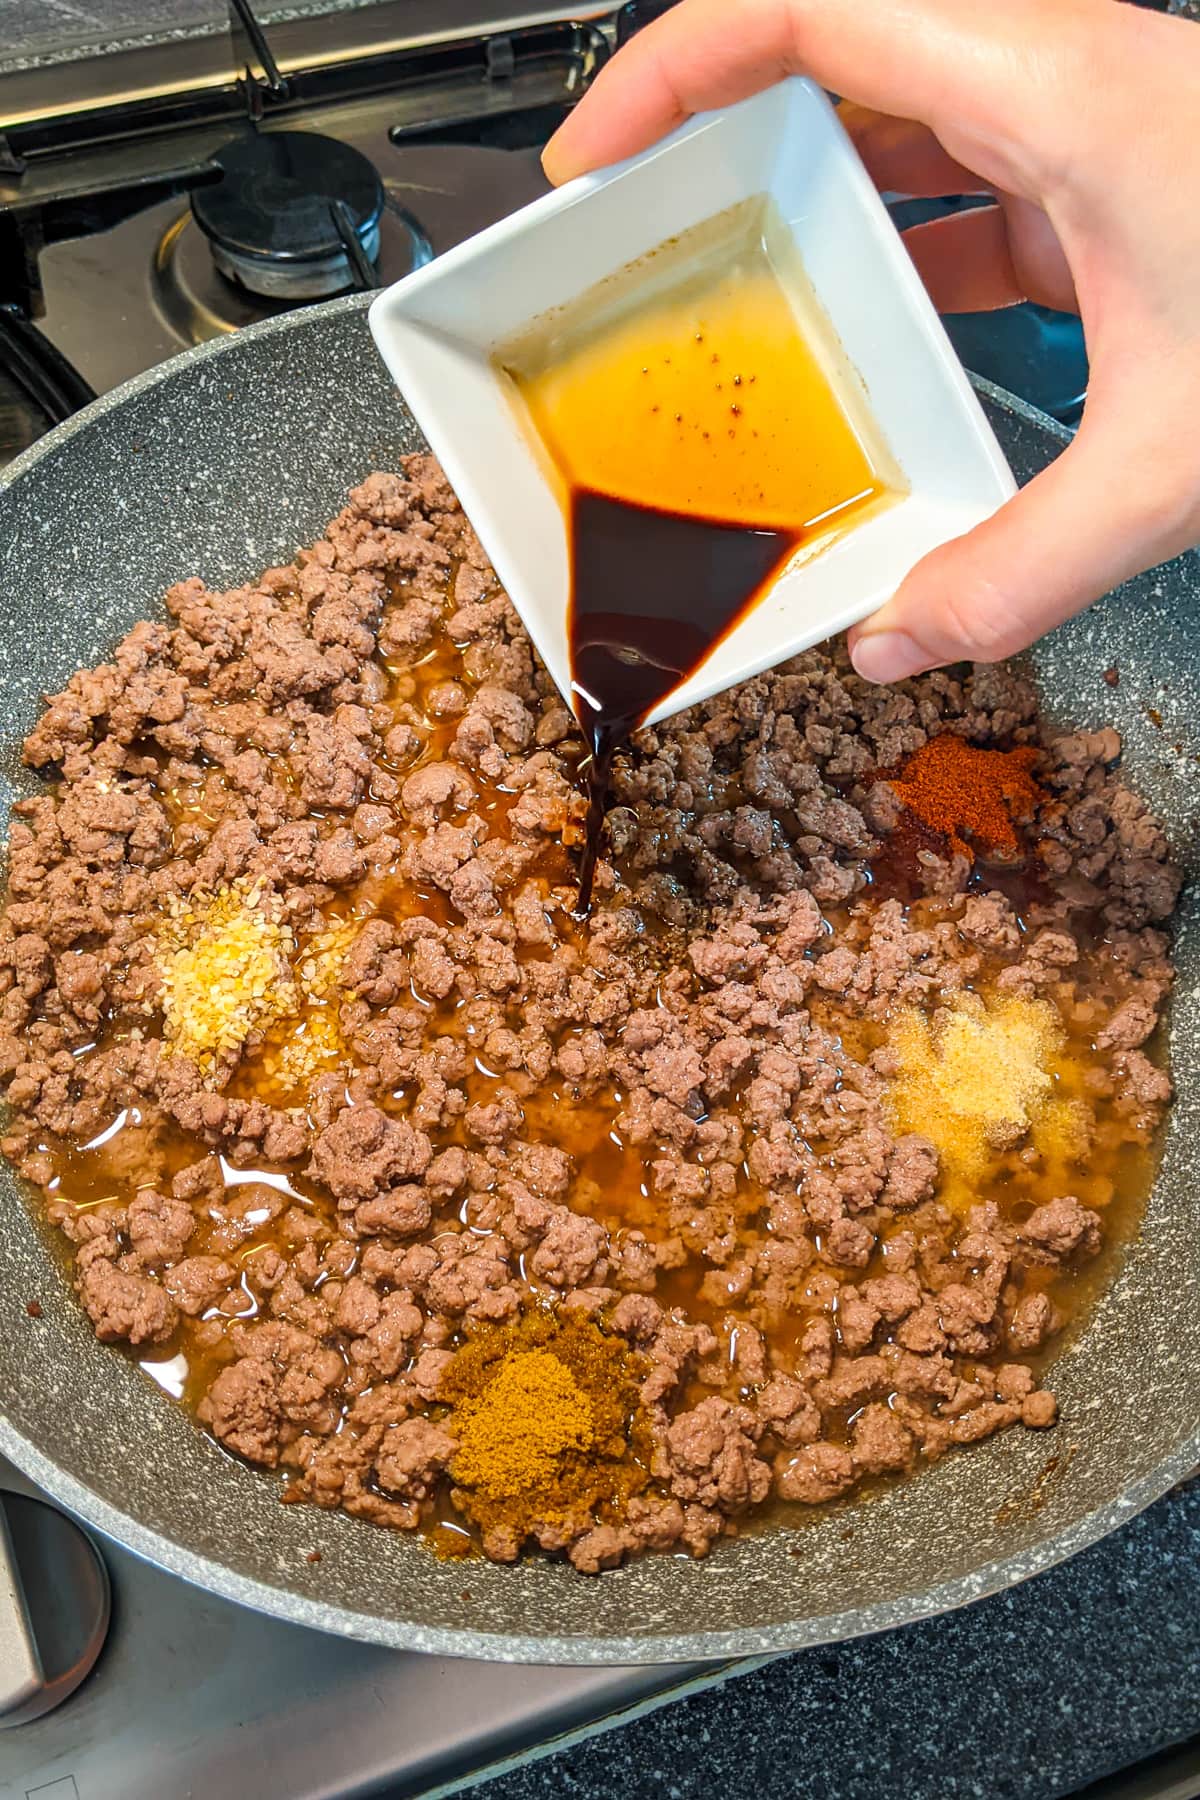 Pouring Worcestershire over frying ground beef.